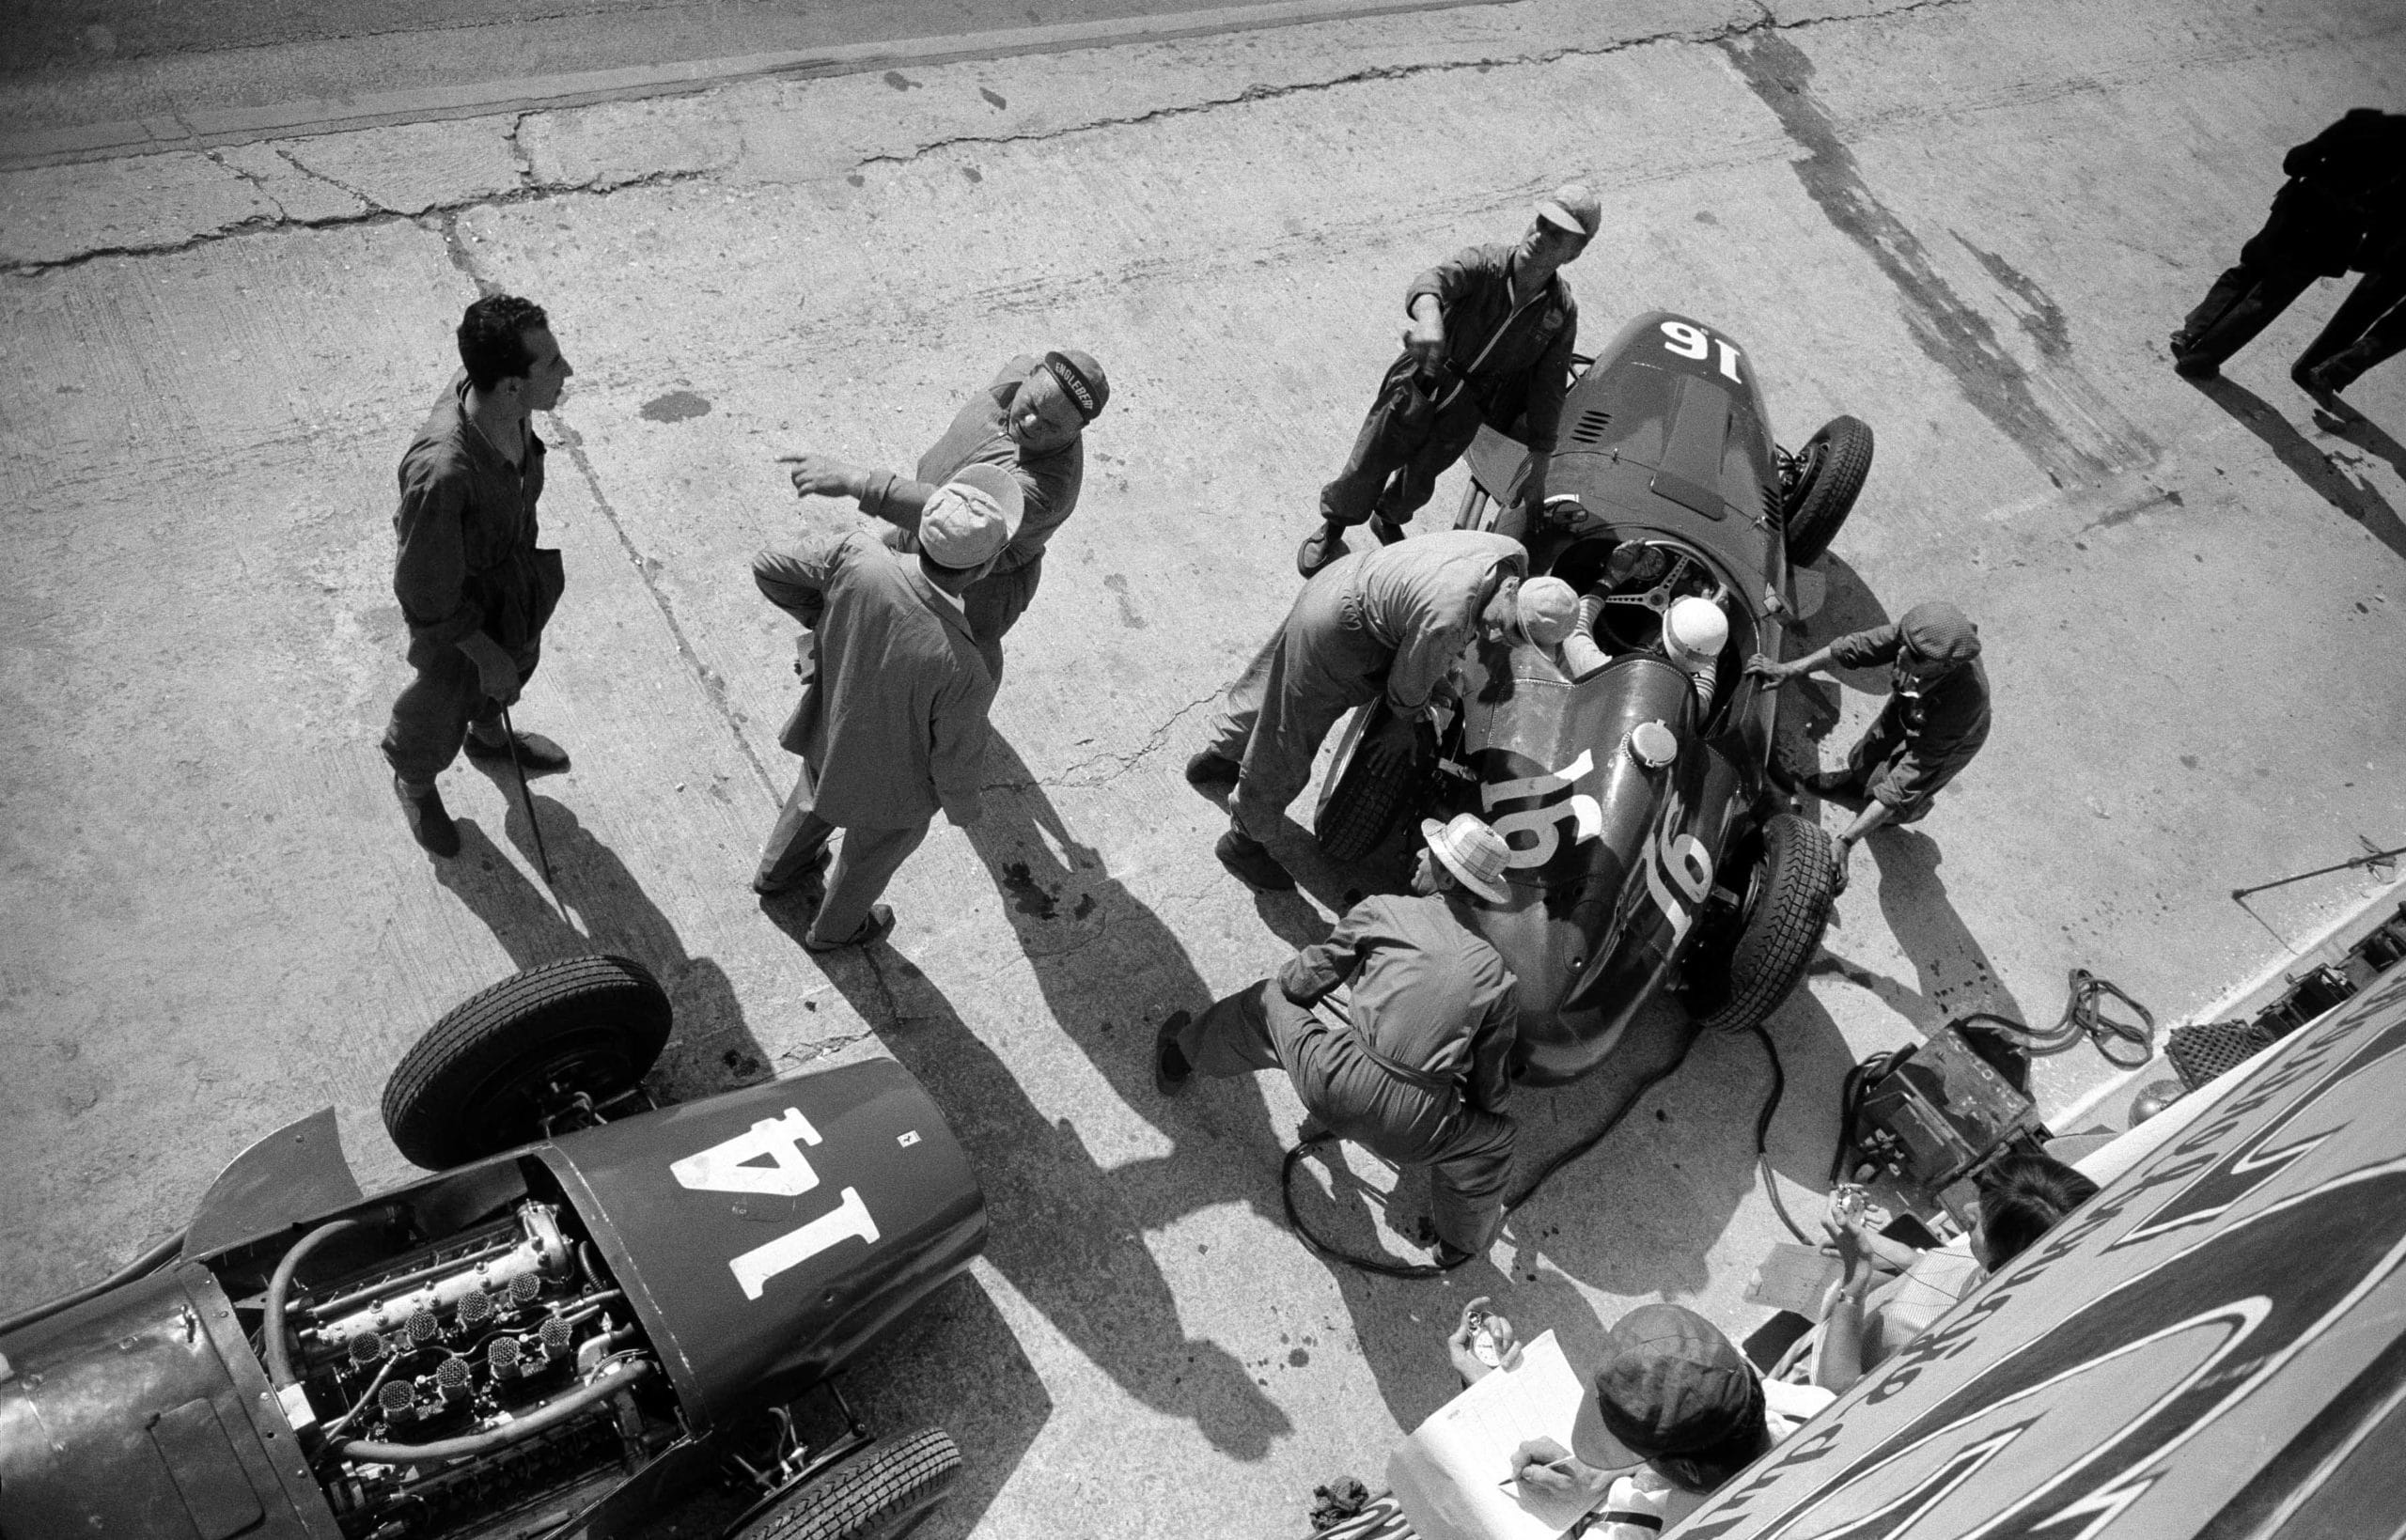 The French Grand Prix; Rouen-les Essarts, July 7, 1957. Here is another wonderful photograph from the 1957 French Grand Prix taken during practice at the Ferrari pits. N. 16 is the car of Maurice Trintignant which is being just fired up and n. 14 is the car for Mike Hawthorn. Meanwhile, mechanic Luigi Parenti directs the orchestra at center stage! (Photo by Klemantaski Collection/Getty Images)